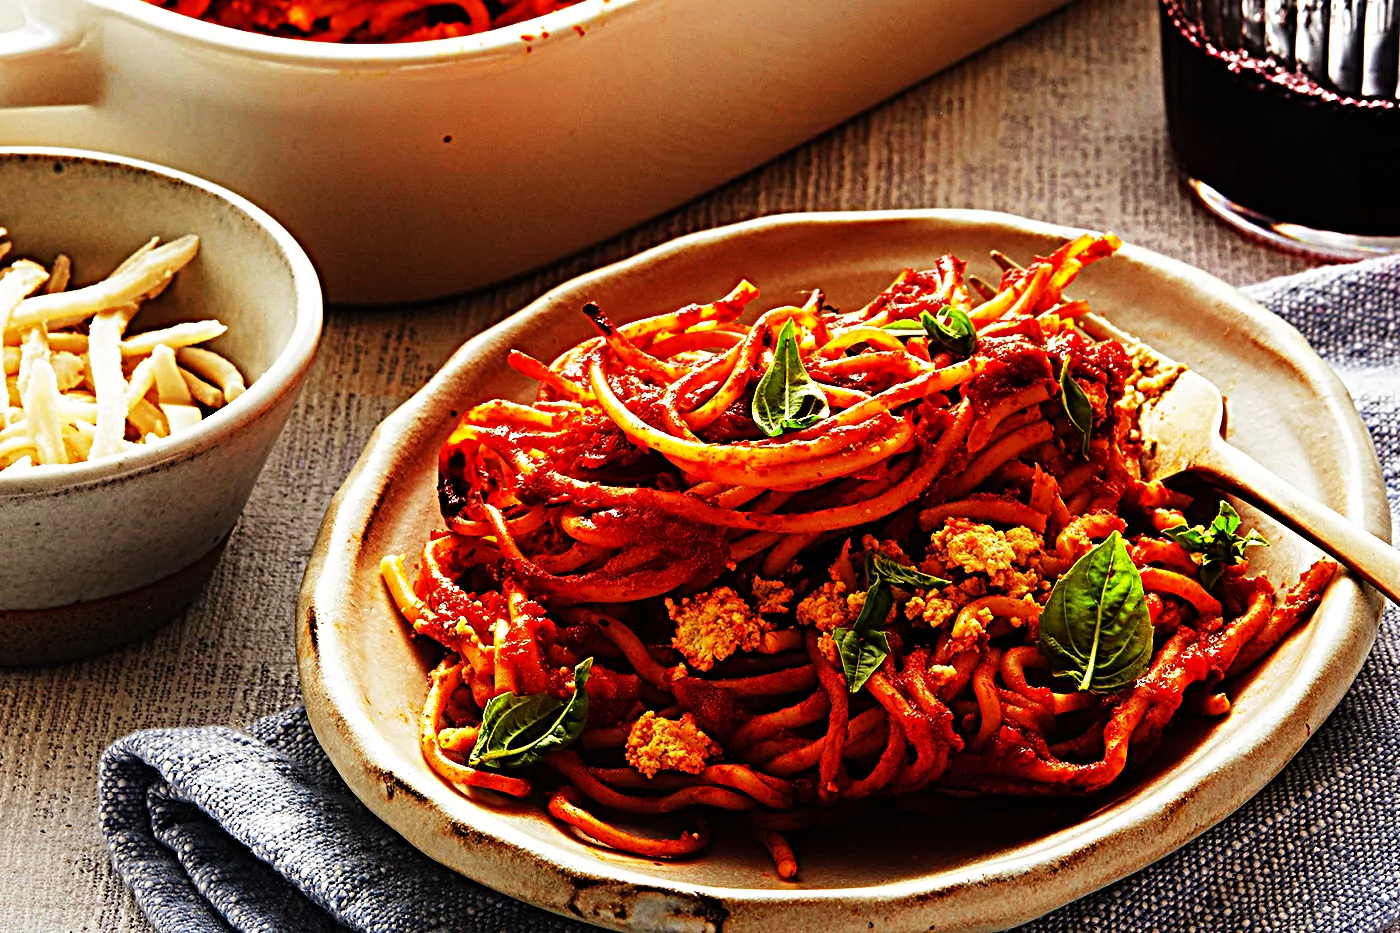 Stupid-Easy Recipe for Vegan Baked Spaghetti (#1 Top-Rated)